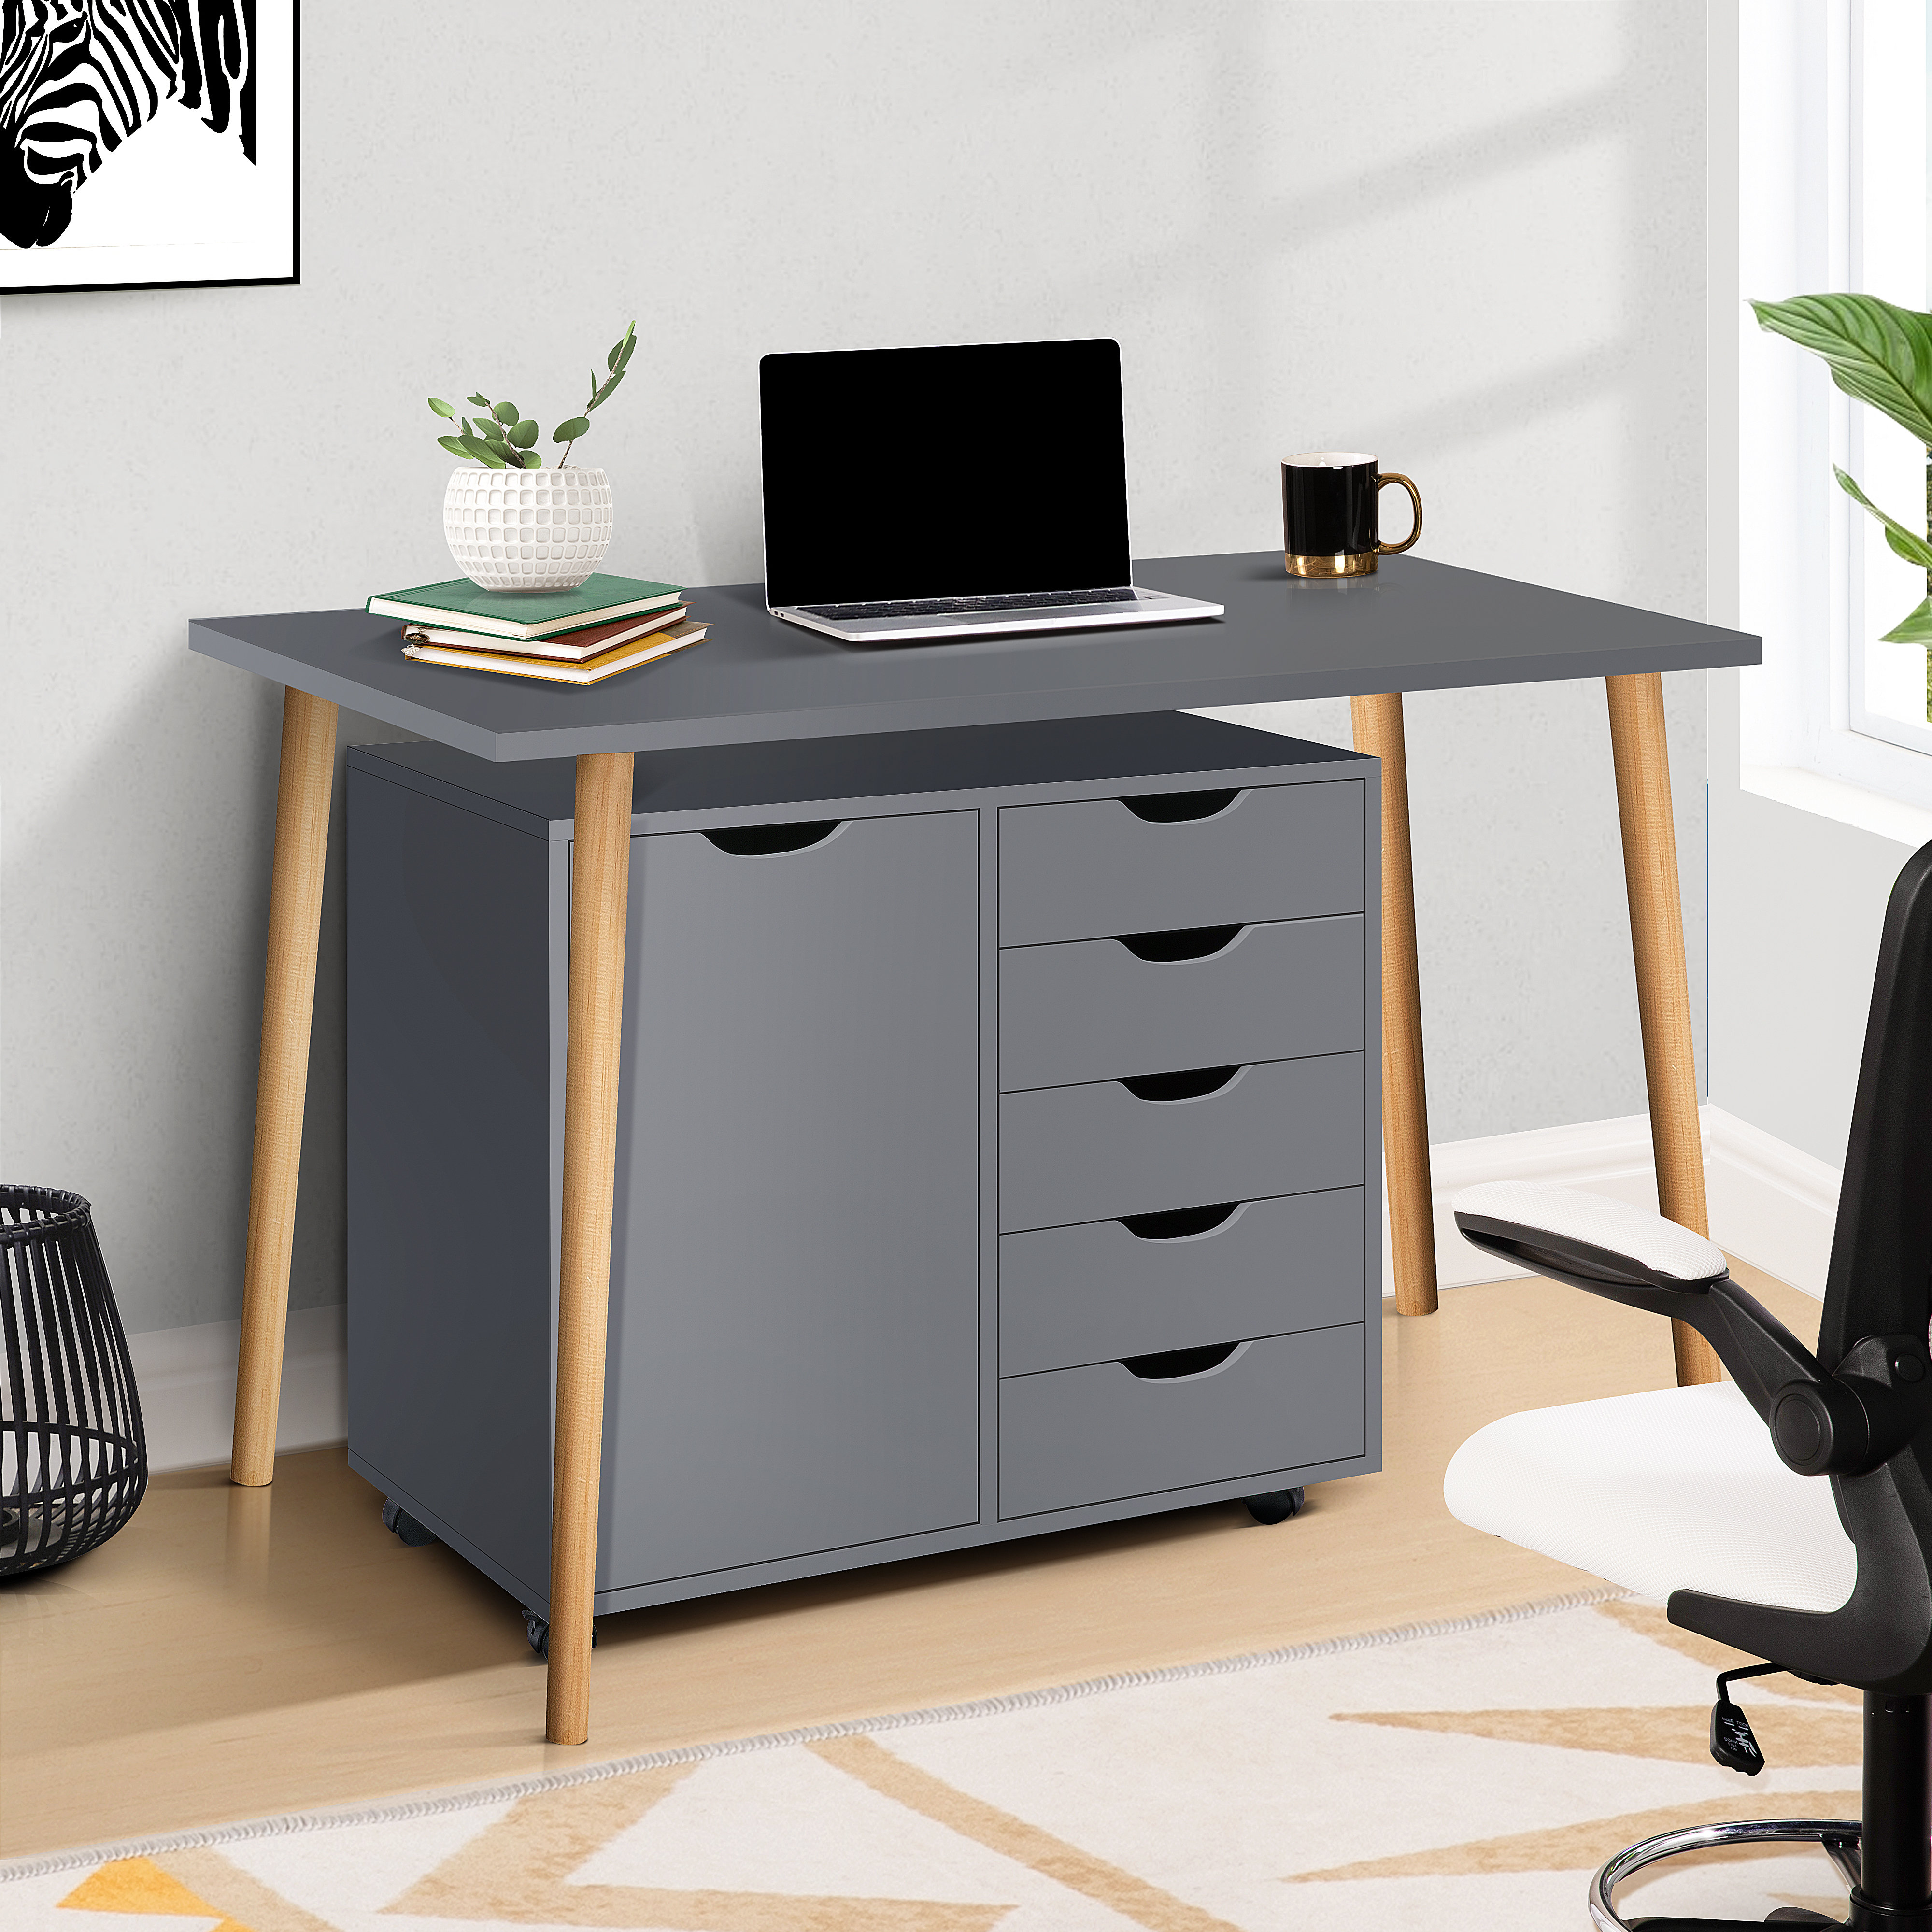 2-Drawer Narrow File Cabinet with Seat by UPLIFT Desk